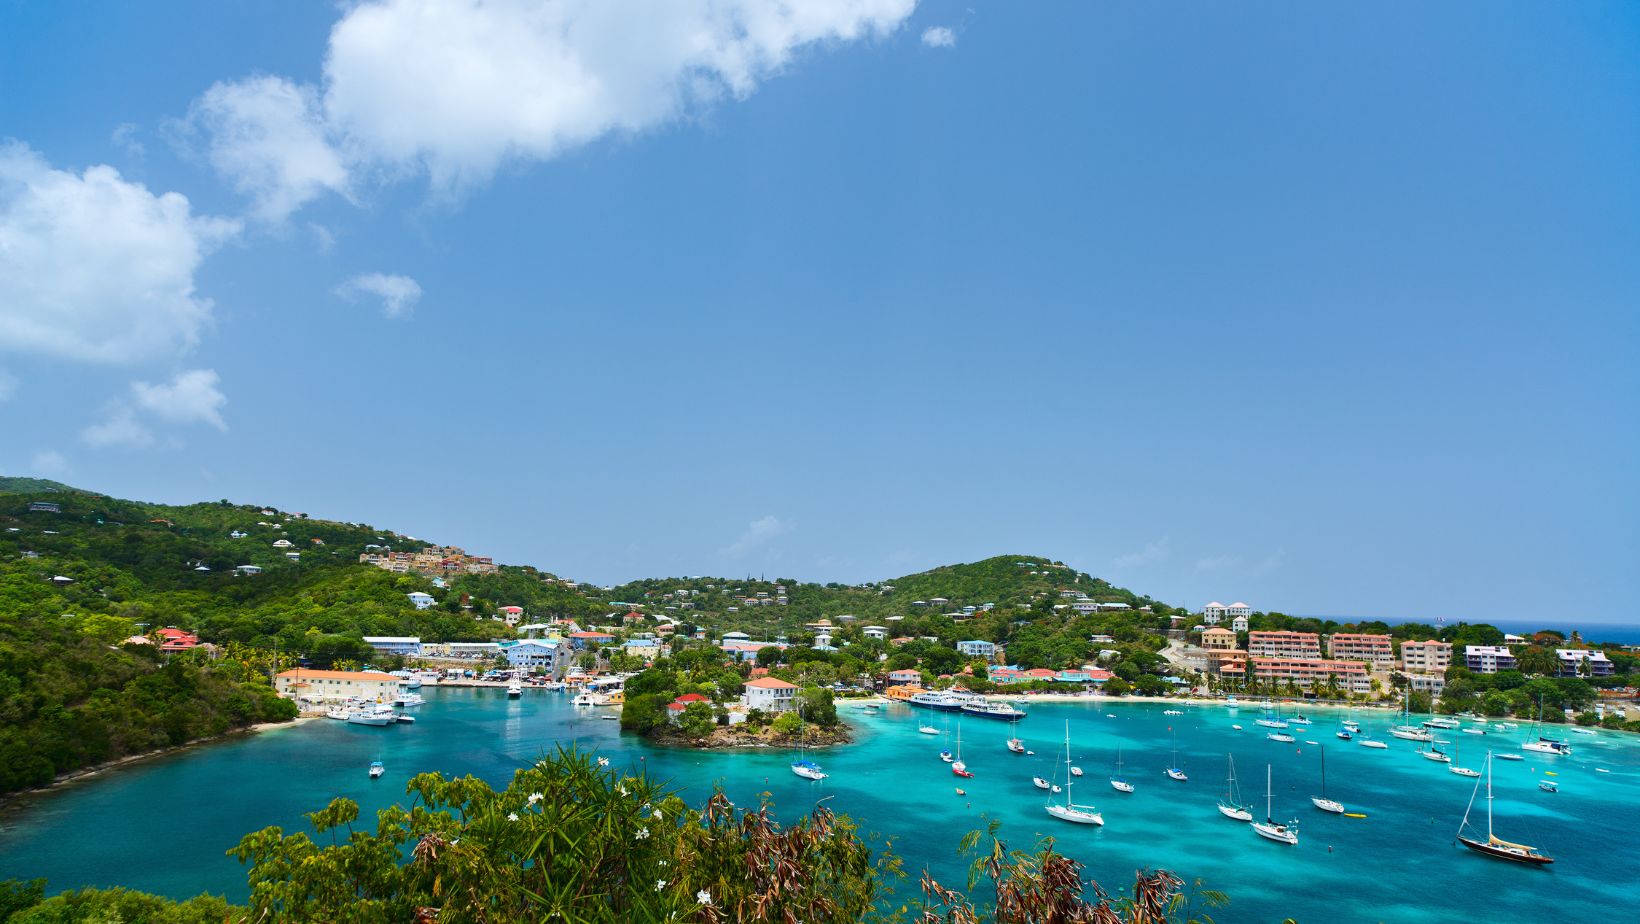 Cruz Bay, St. John, is your go-to for vibrant nightlife and provisioning during your USVI sailing adventure.